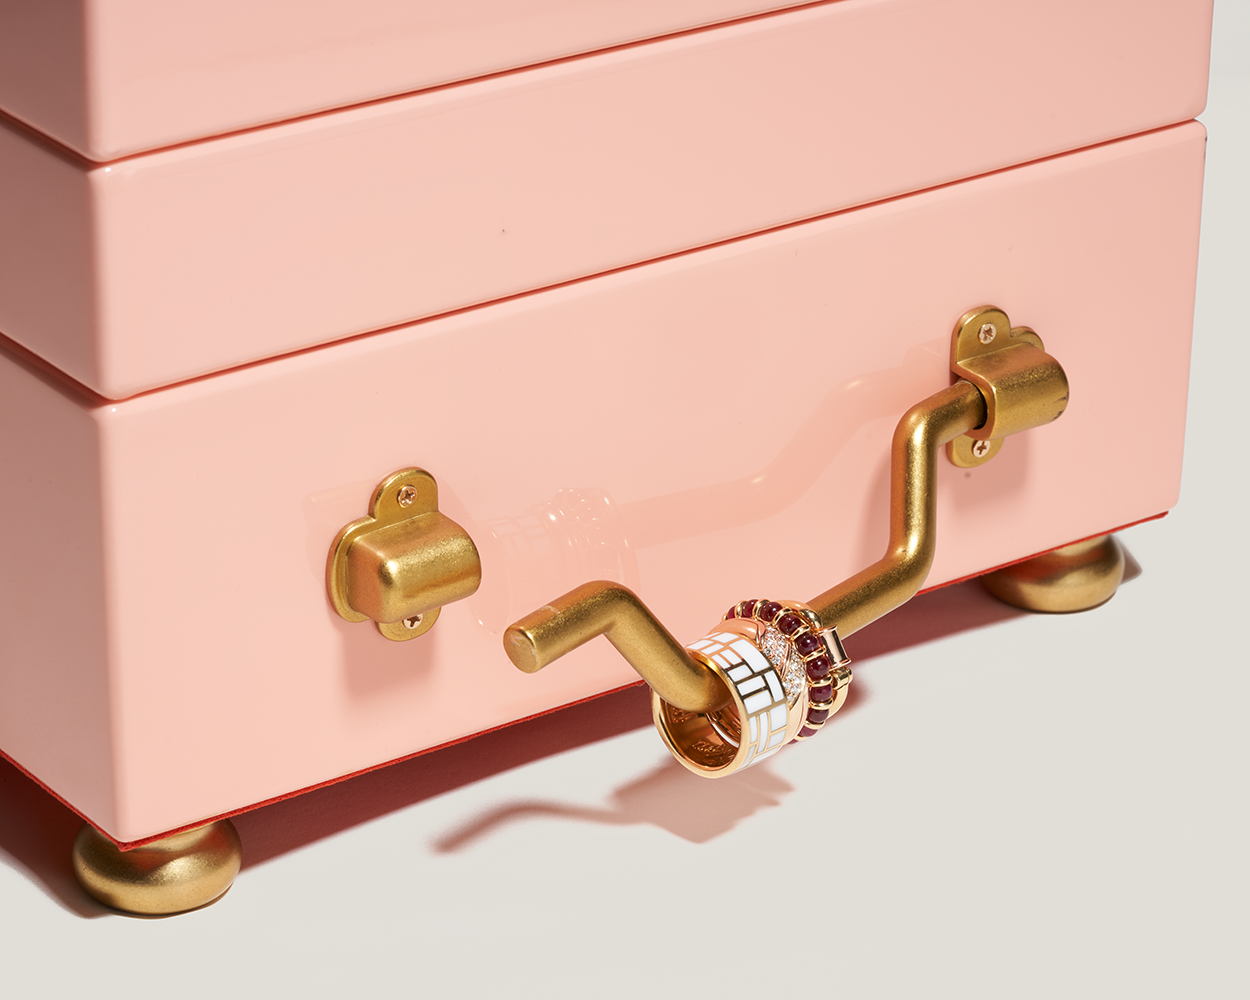 Close up of detached side handle on pink jewelry box with multiple rings attached